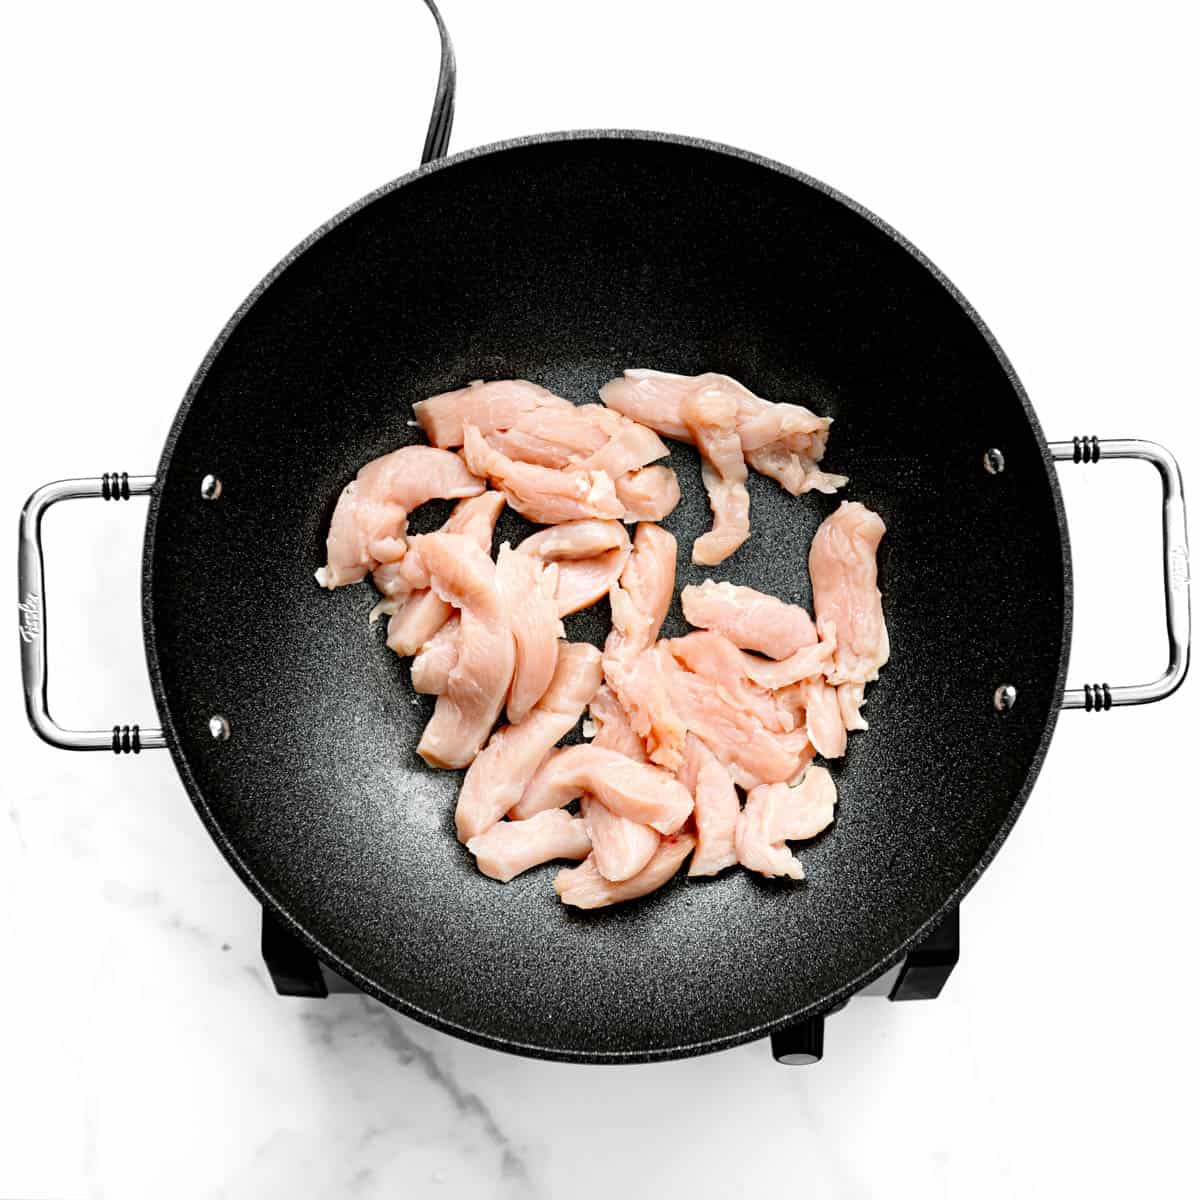 cook the chicken breast strips until no longer pink and cooked through.